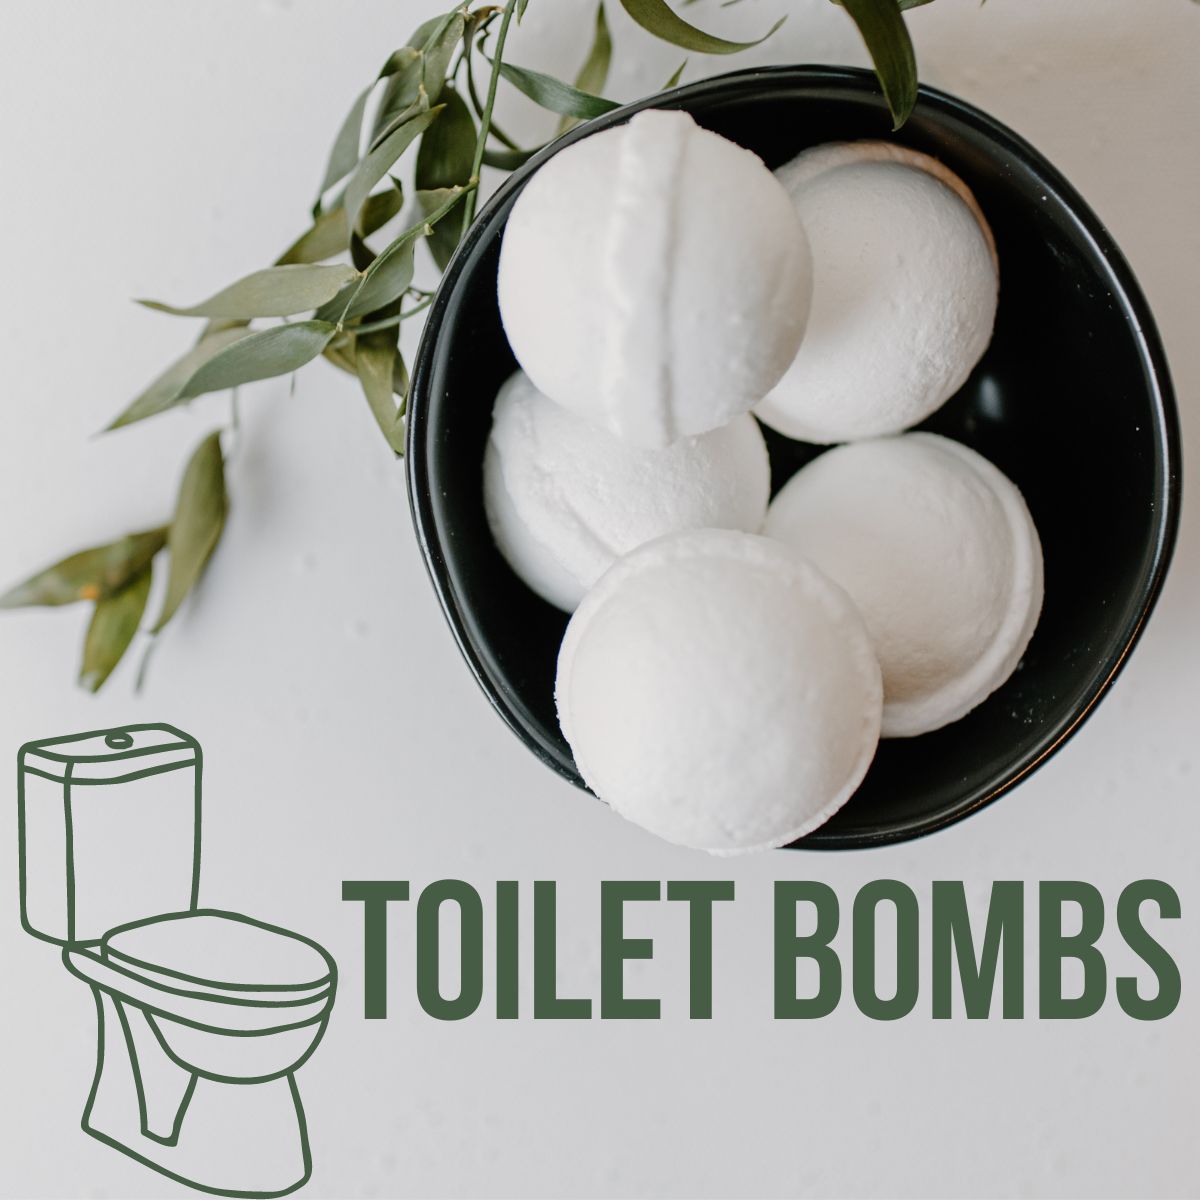 how to make toilet bombs